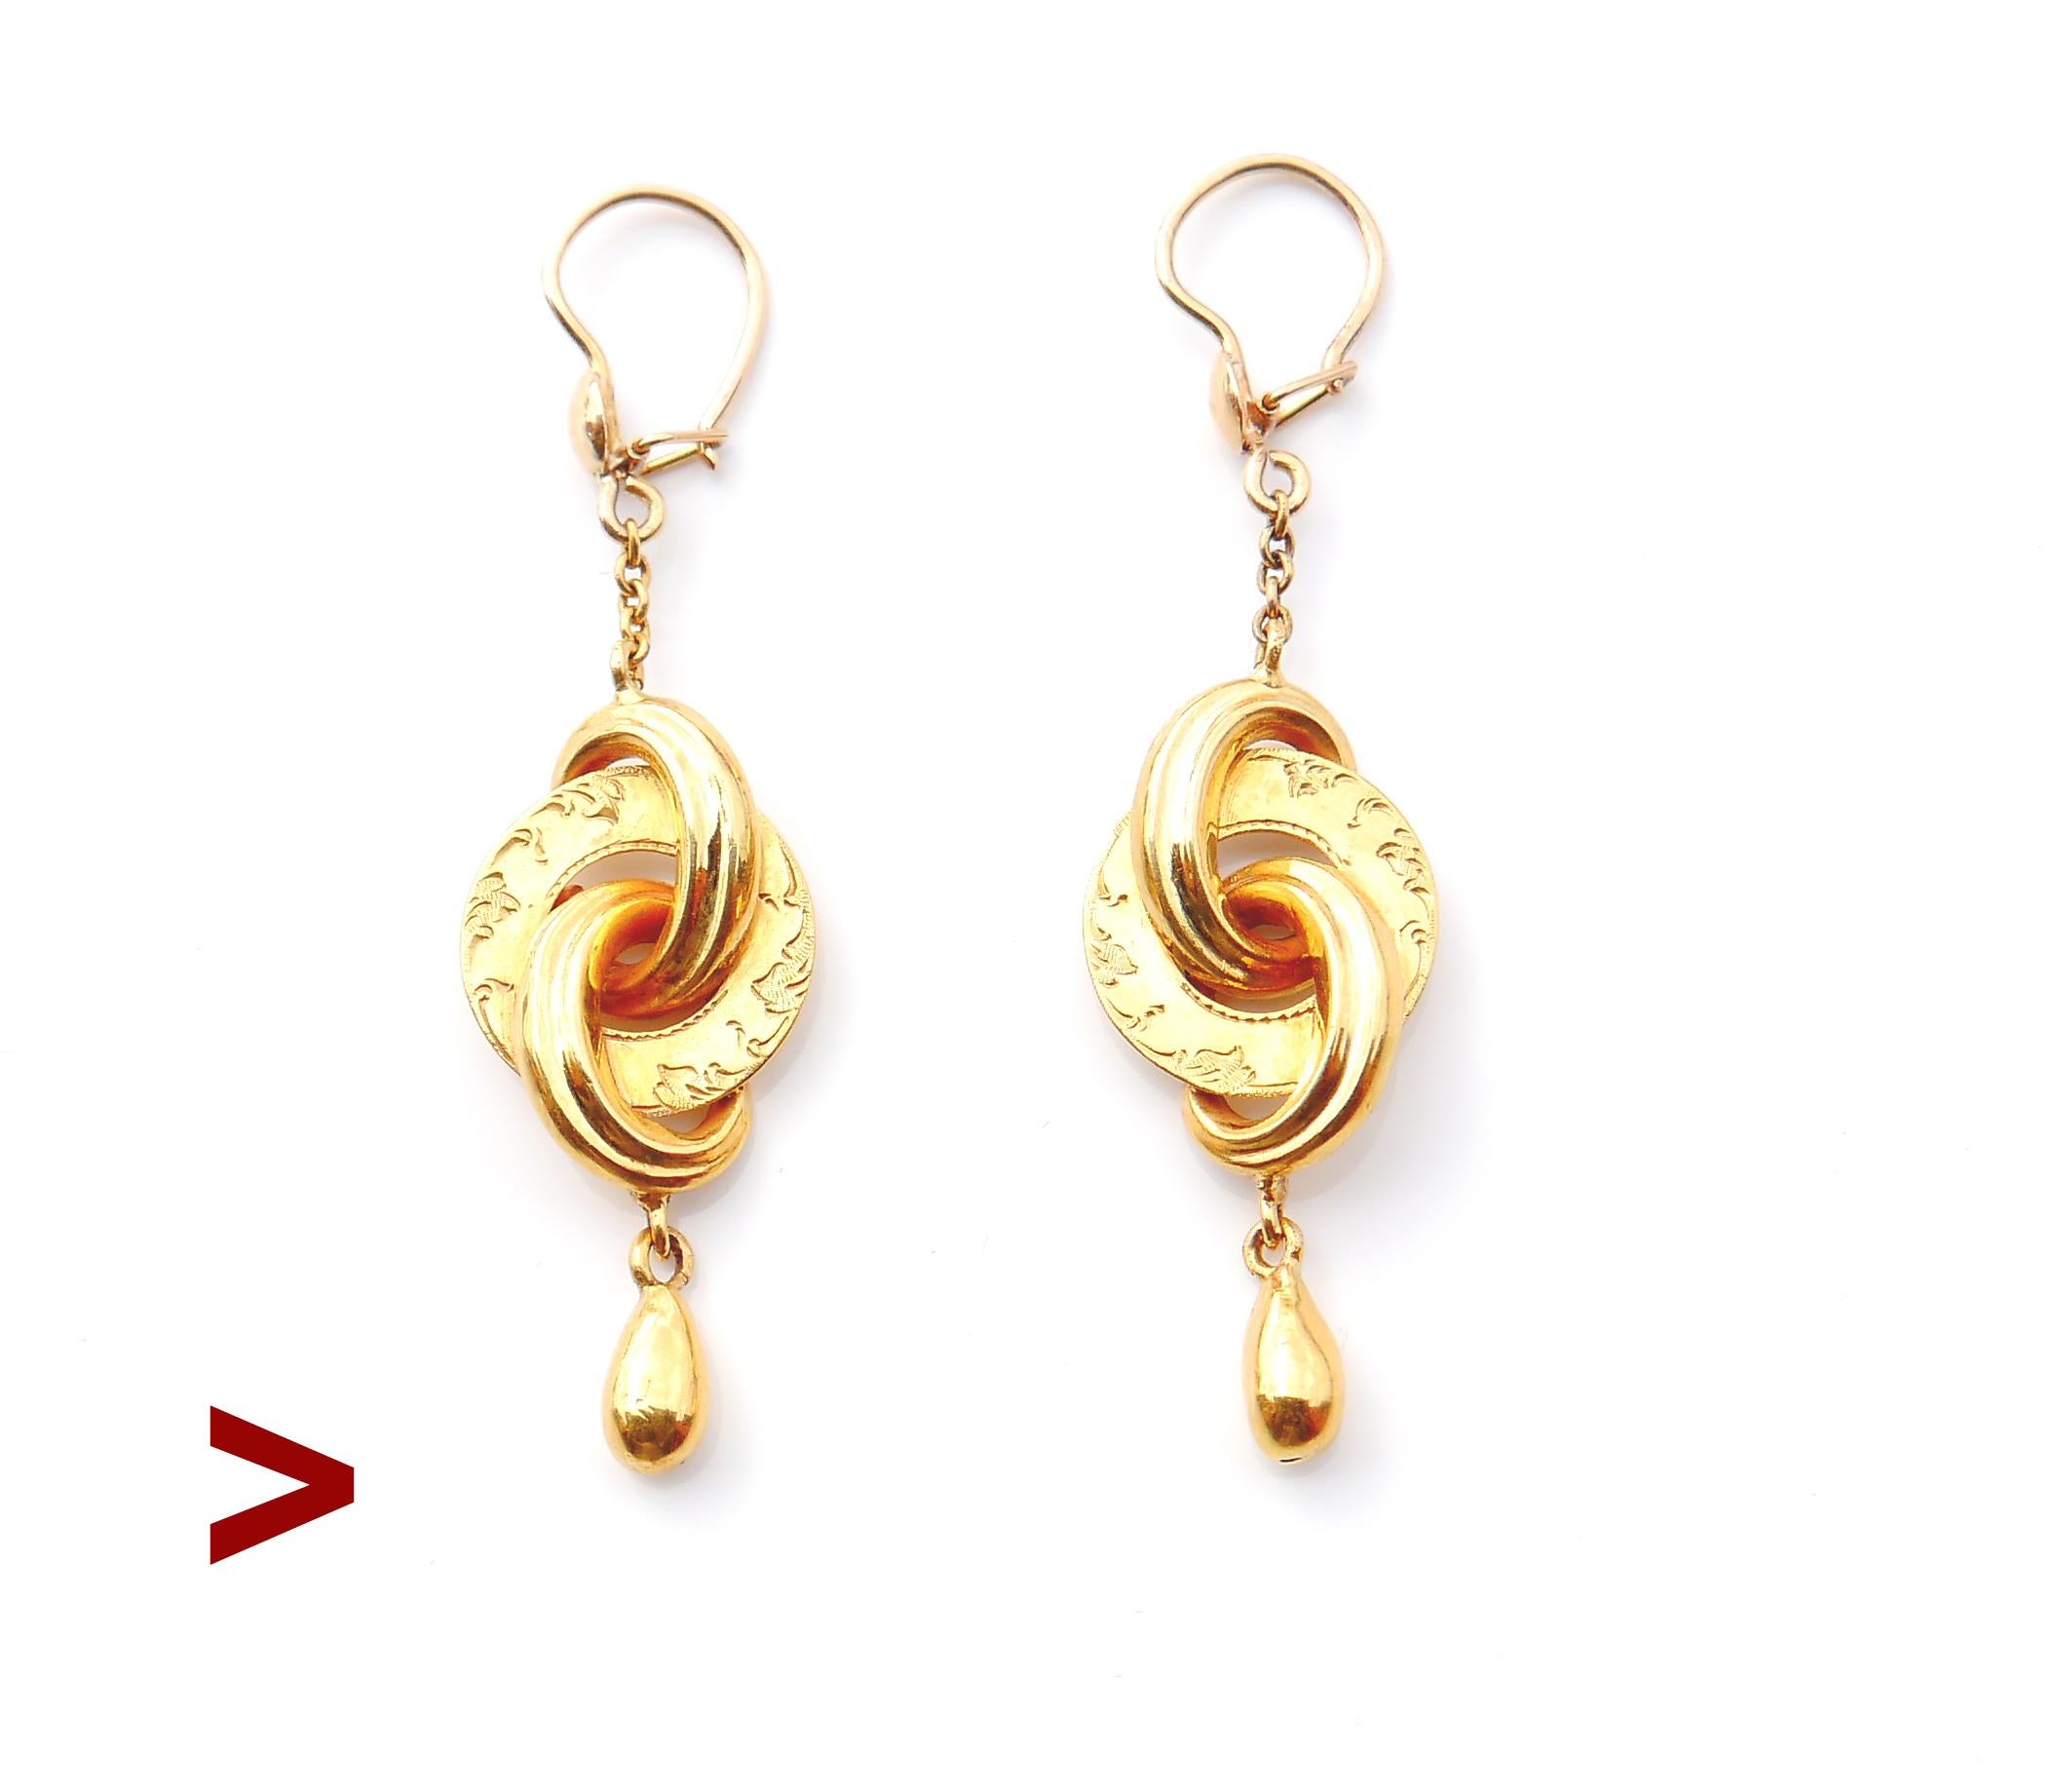 A pair of antique earrings with bodies designed as chained discs or eternal knots in solid 18K Yellow Gold, with freely suspended drop shaped dangles.

Each of three discs has volume and all three are hollow inside, middle ones with delicate floral